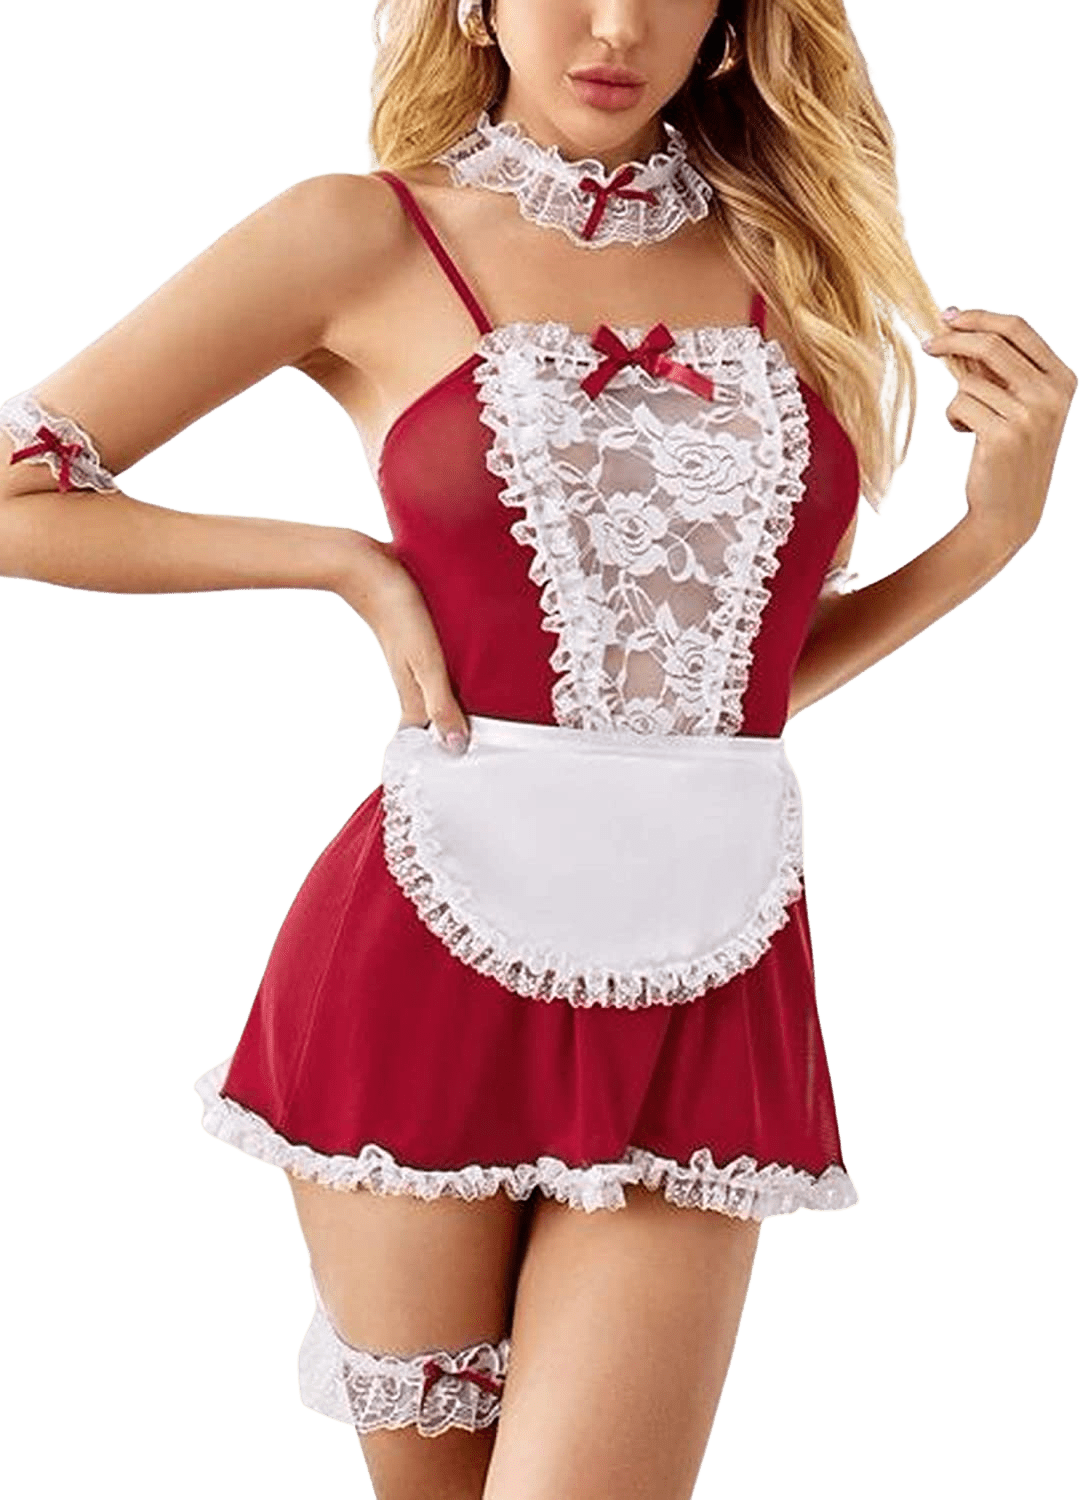 Women Lace French Maid Lingeire Sexy Maid Outfit Cosplay Costume Set | Decor Gifts and More